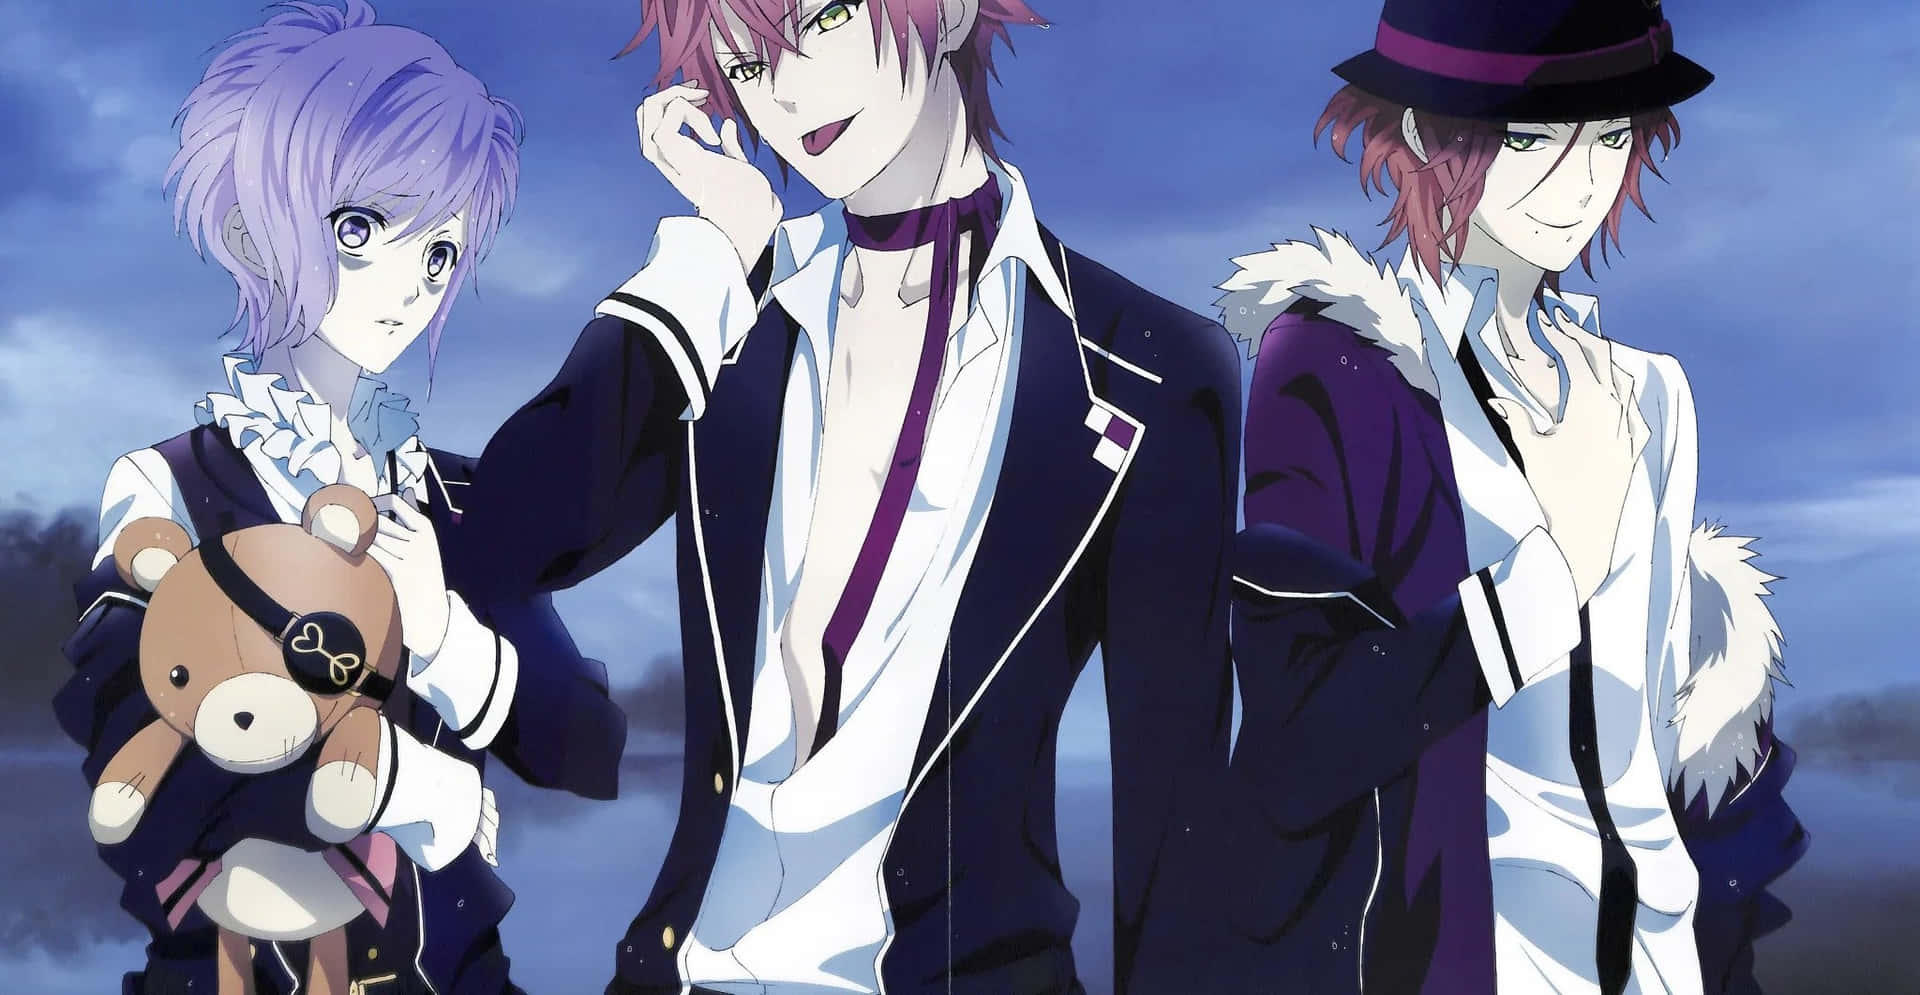 An intense and passionate exchange between two Diabolik Lovers